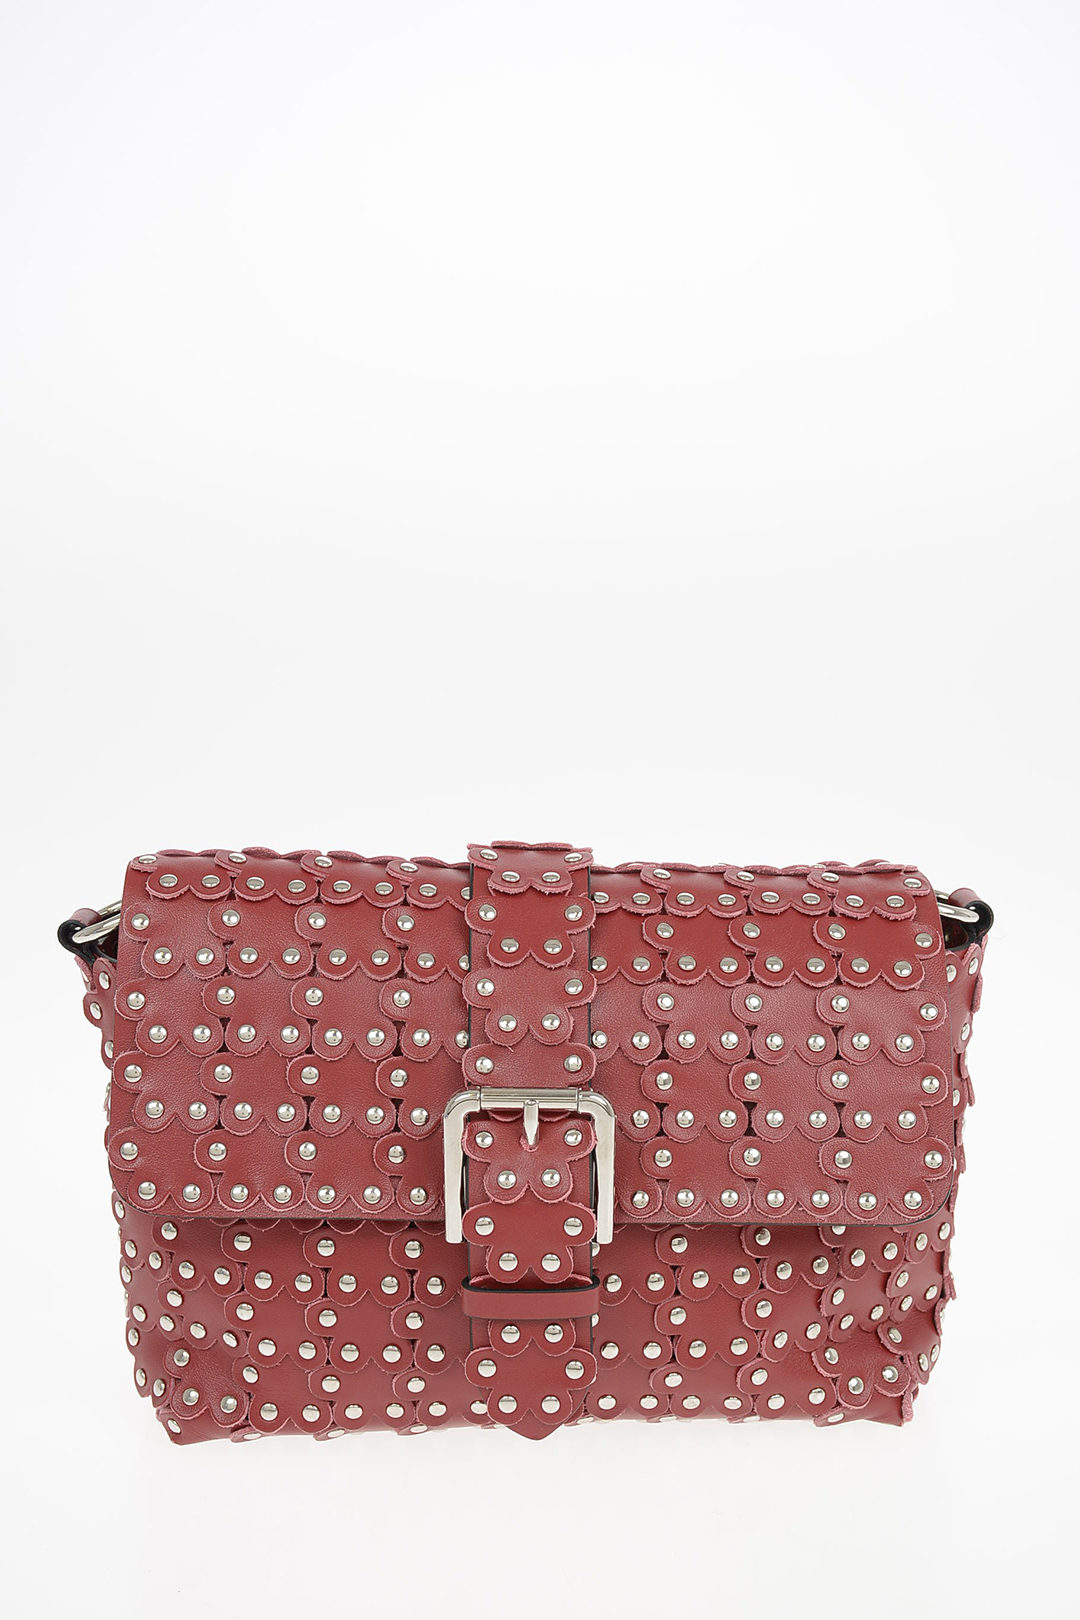 Valentino By Red Valentino Studded Floral Puzzle Calf Leather Bag NWTS $985